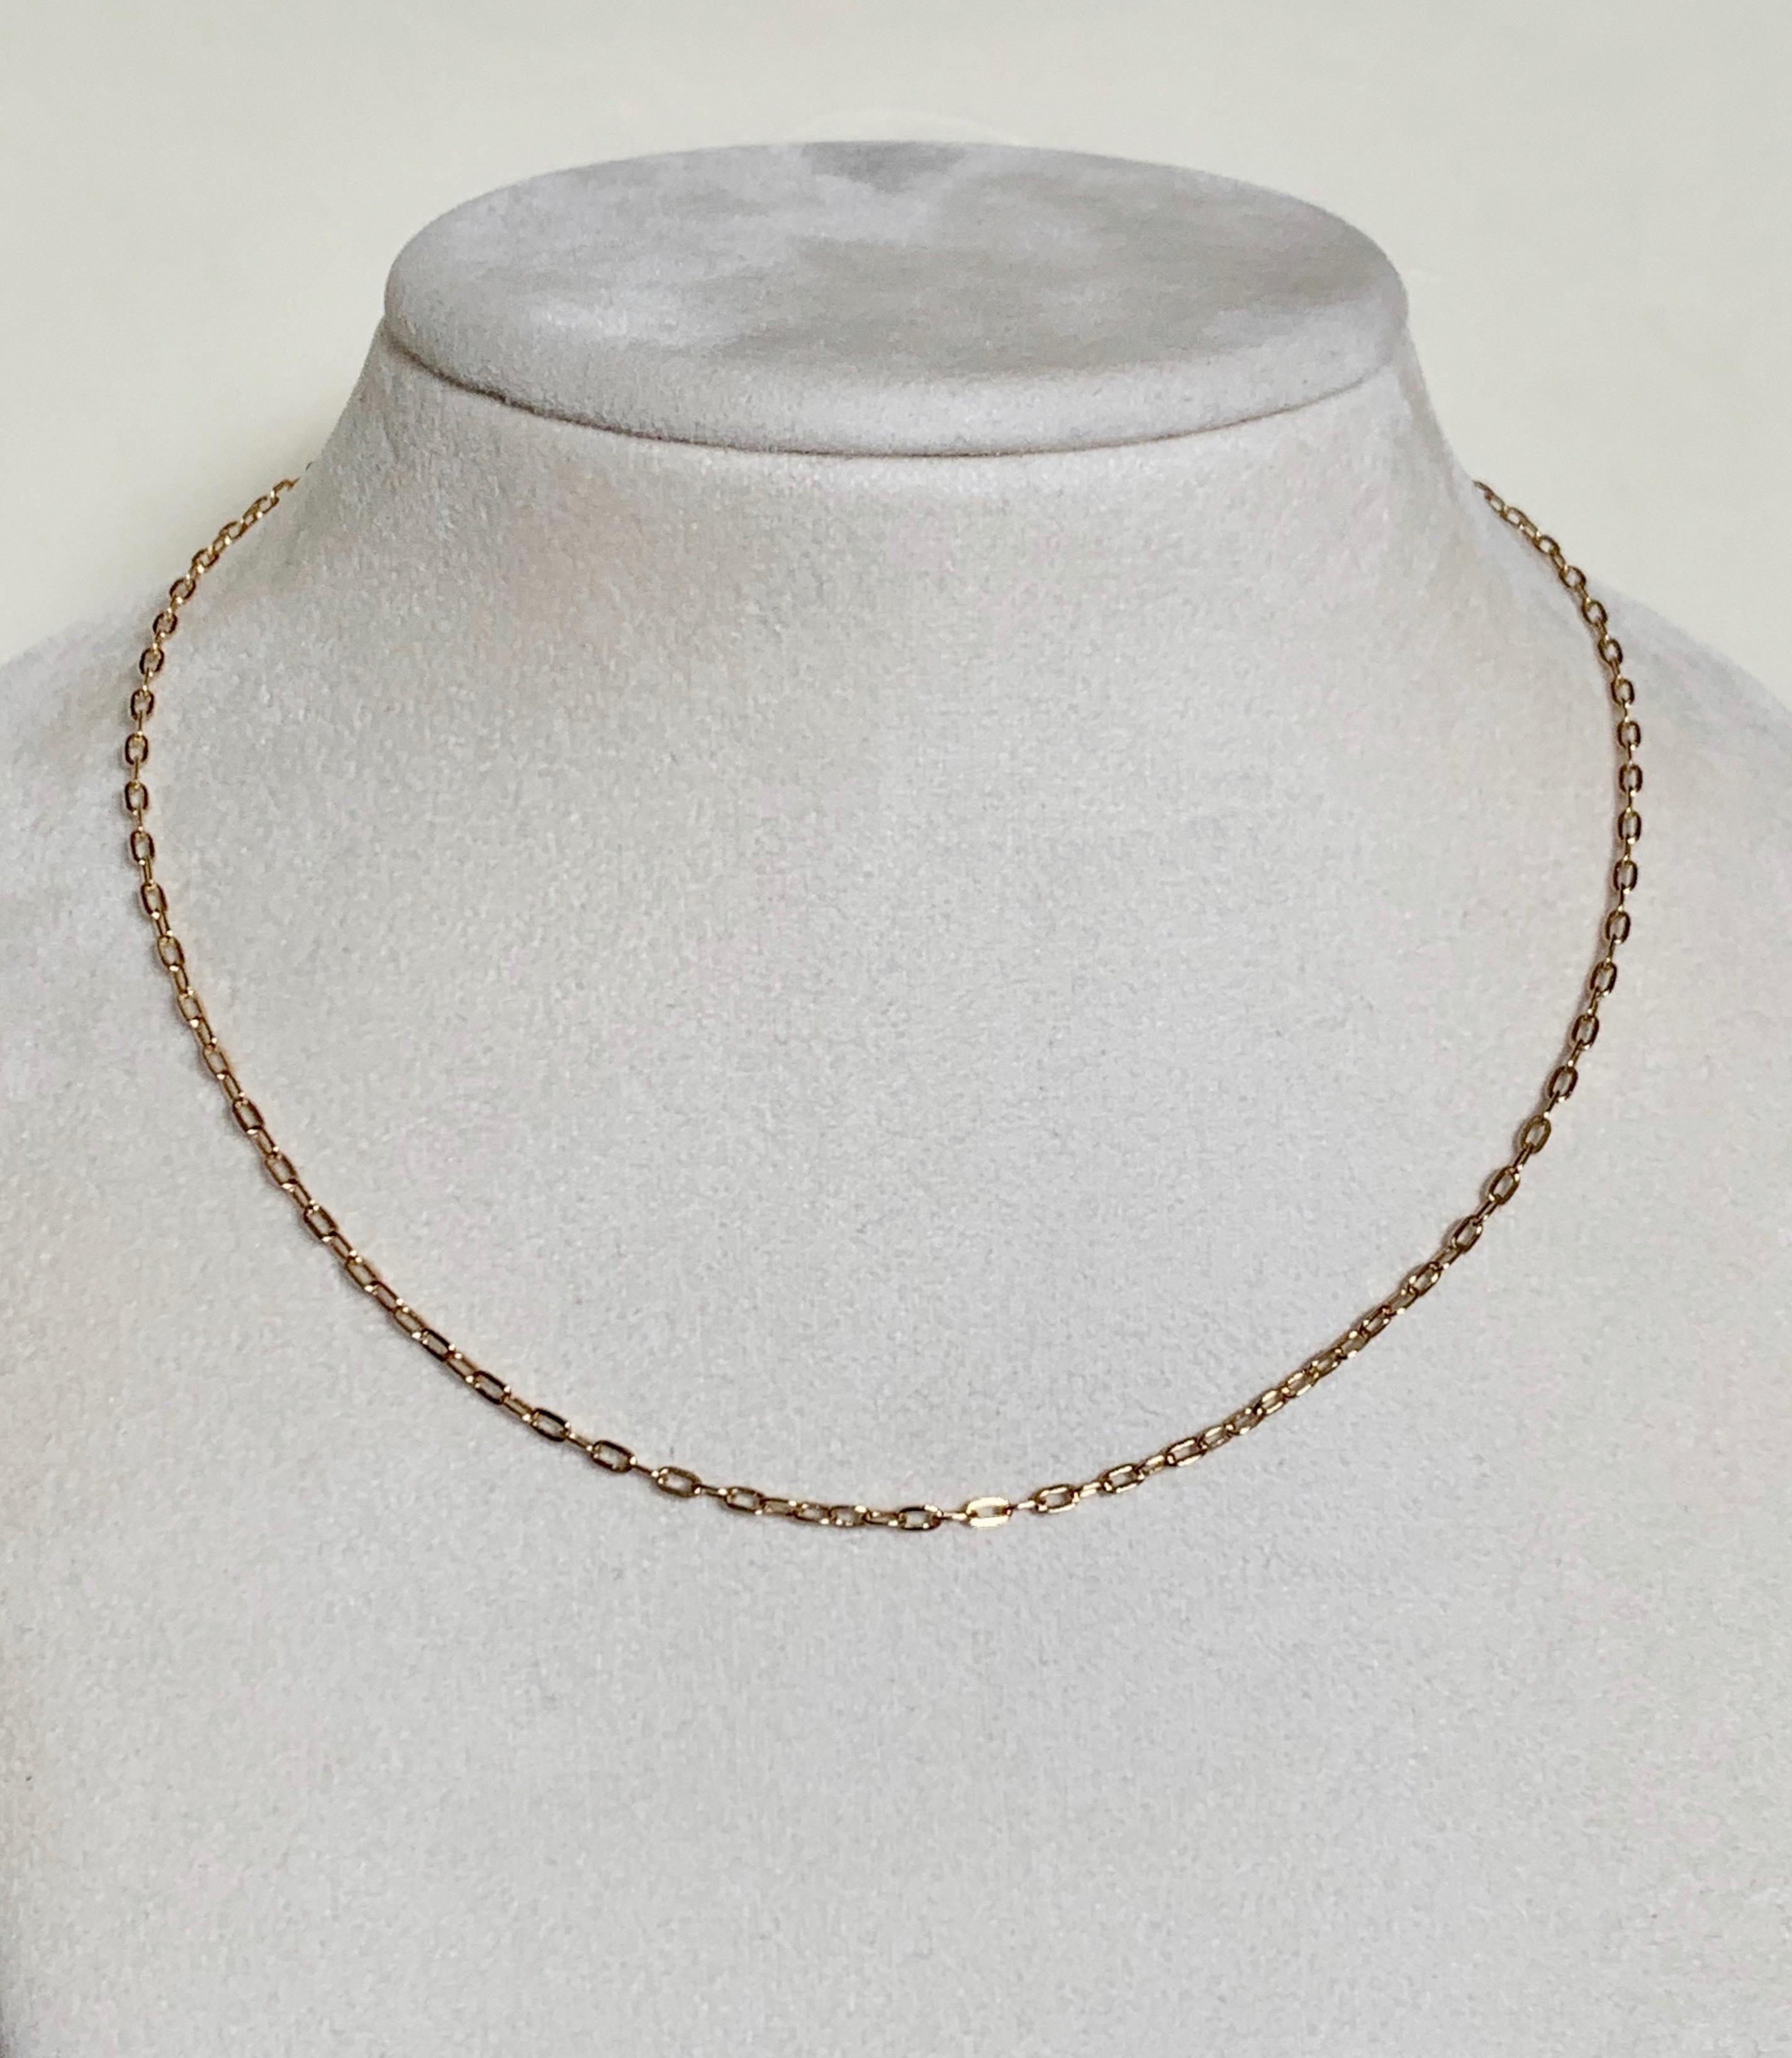 Contemporary 18 Karat Solid Yellow Gold Link Chain Necklace / Choker For Sale